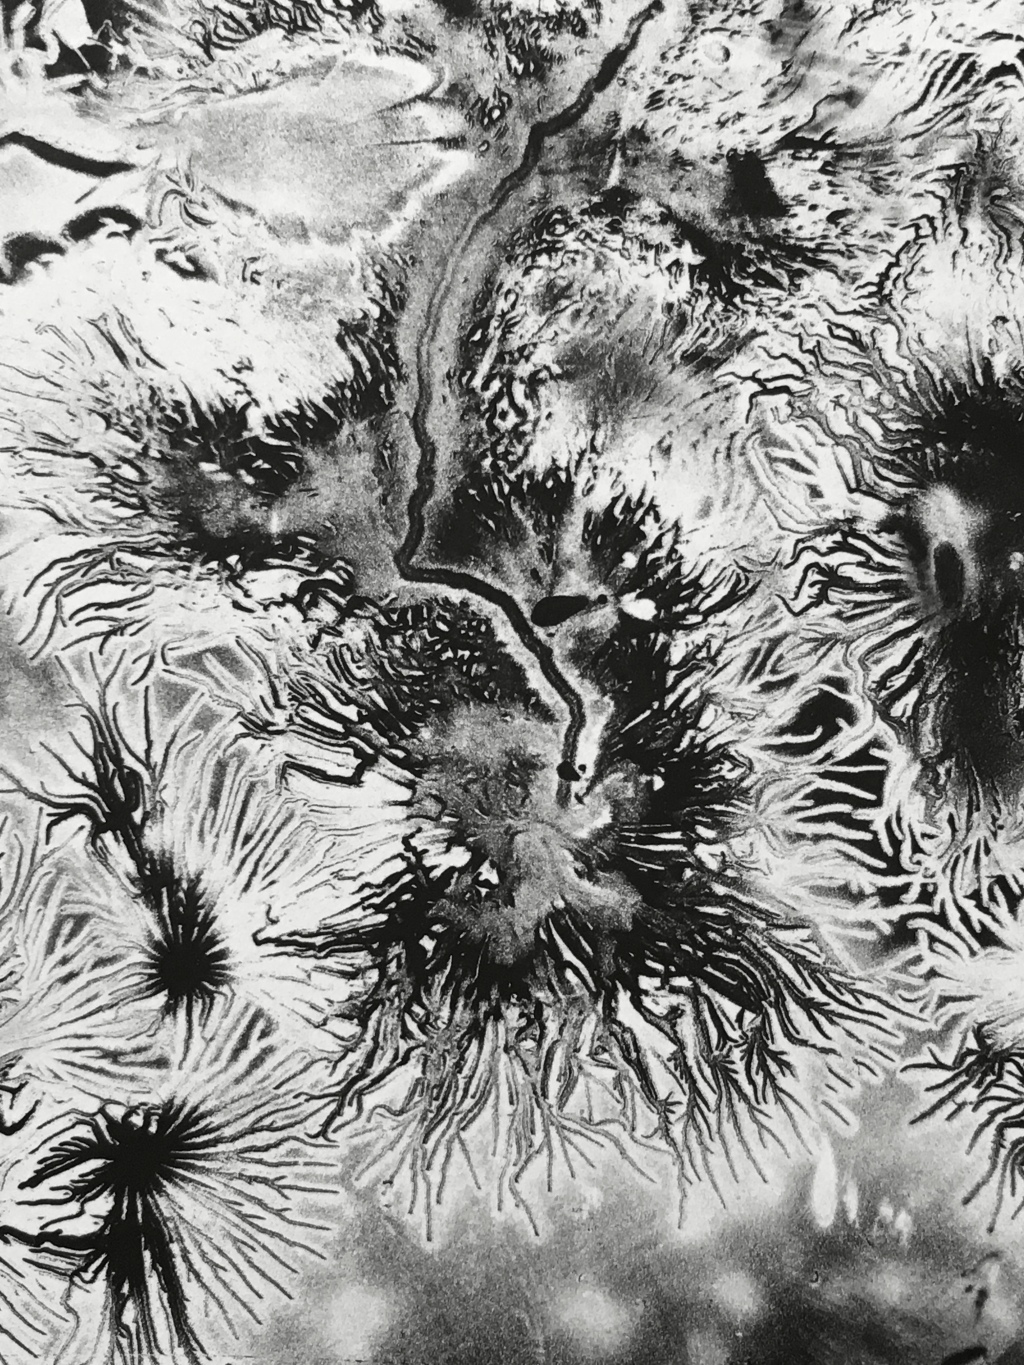 What Are Electrostatic Monotypes?